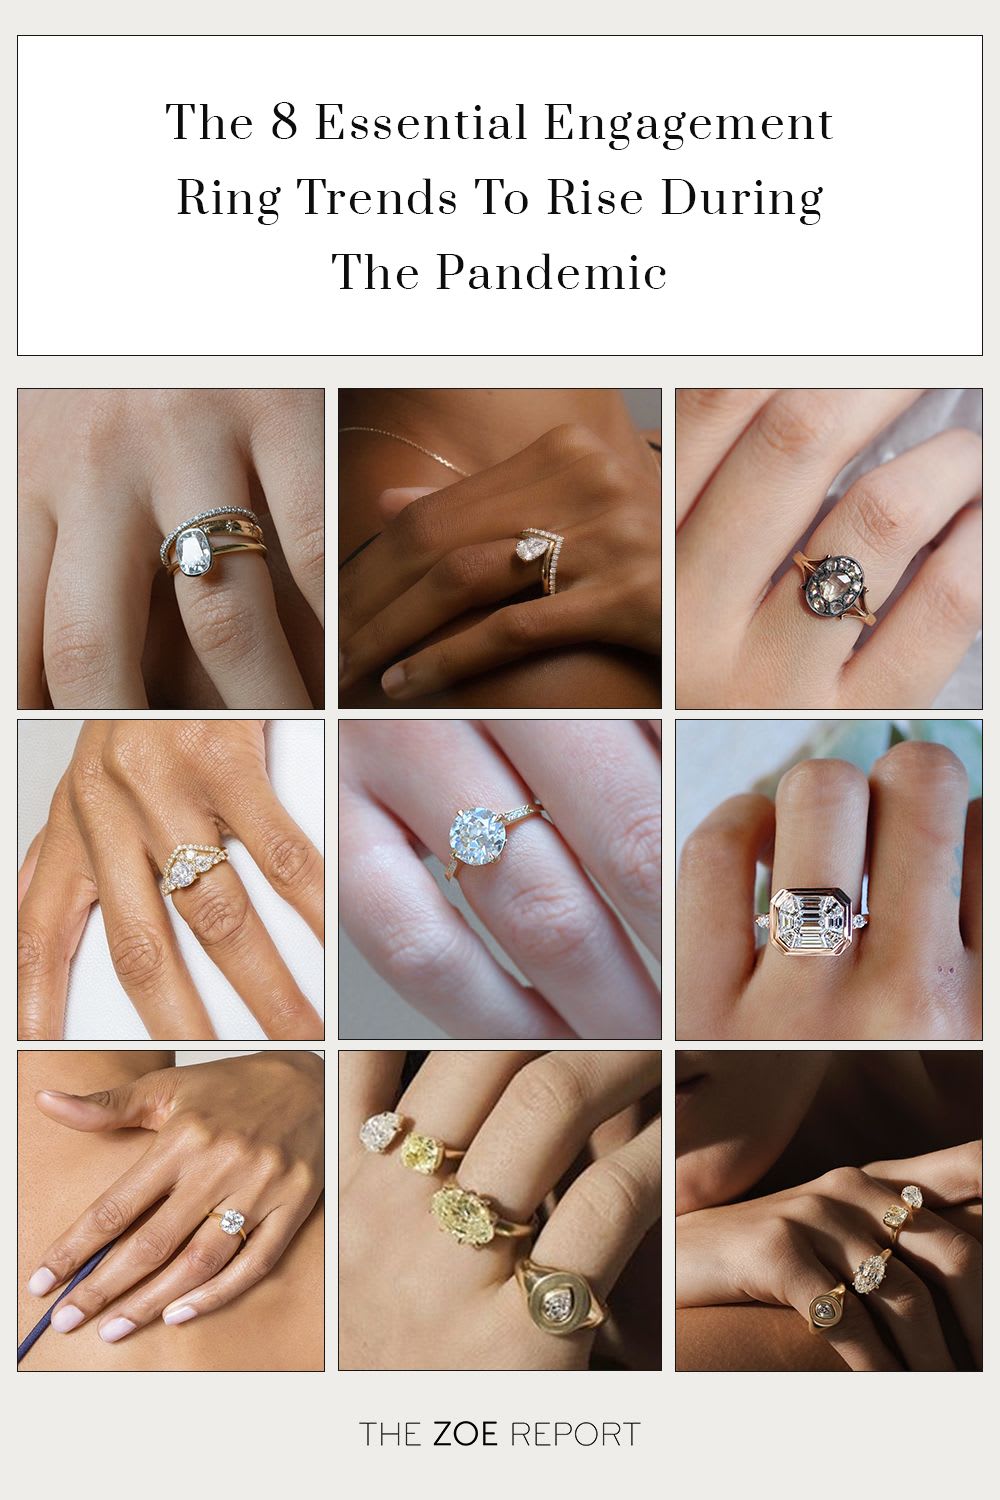 The 8 Essential Engagement Ring Trends To Rise During The Pandemic